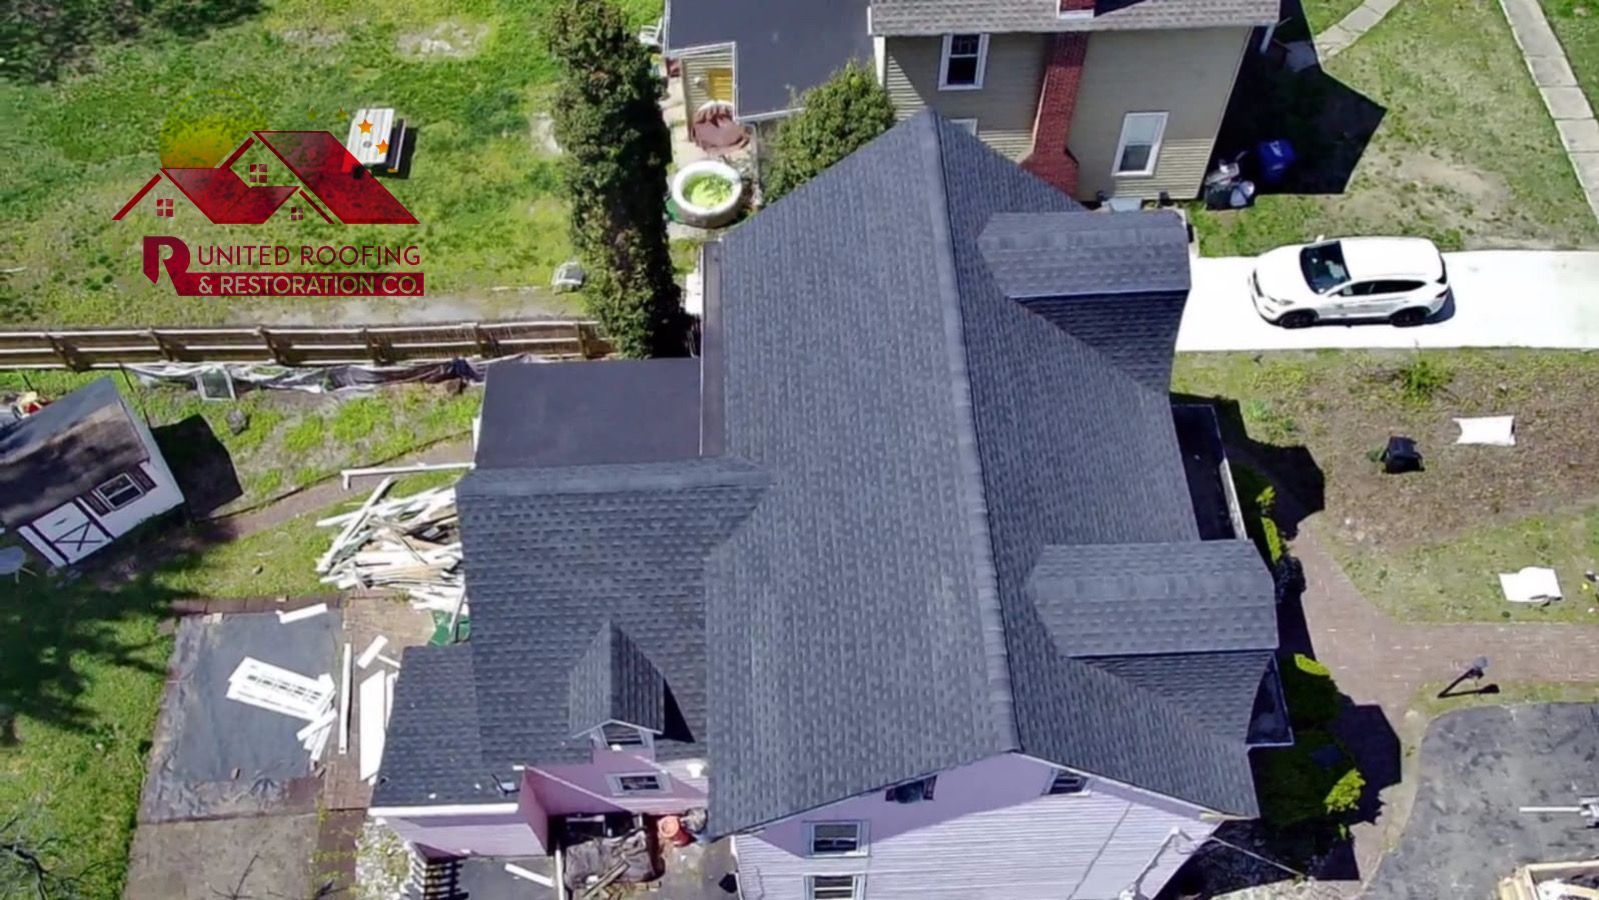 Roof Arial View - Hamilton Township, NJ - United Roofing & Restoration